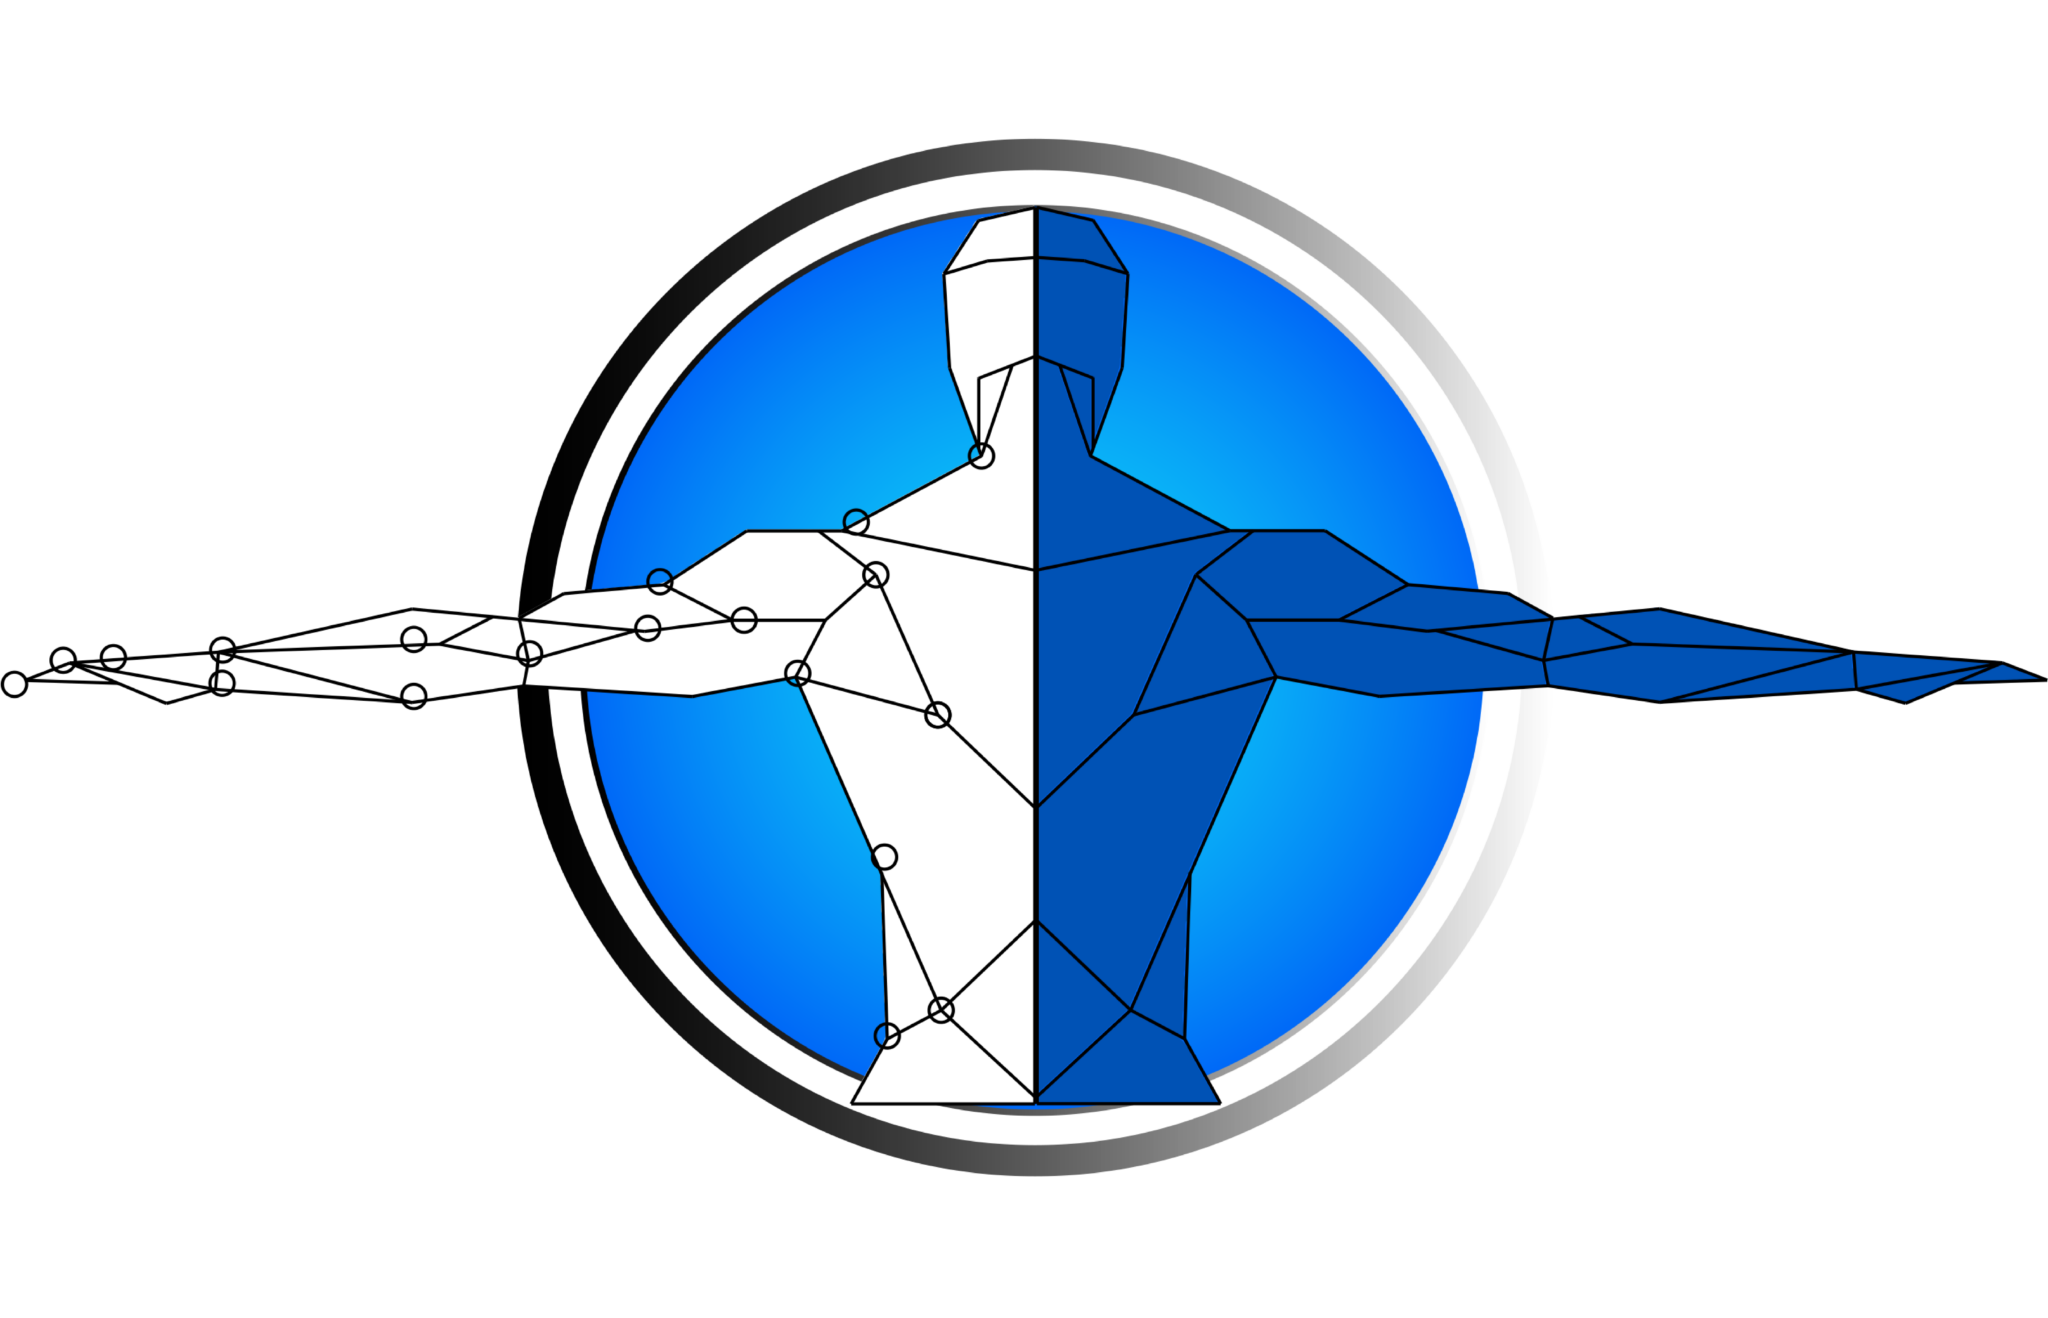 Physiotherapy logo Vectors & Illustrations for Free Download | Freepik